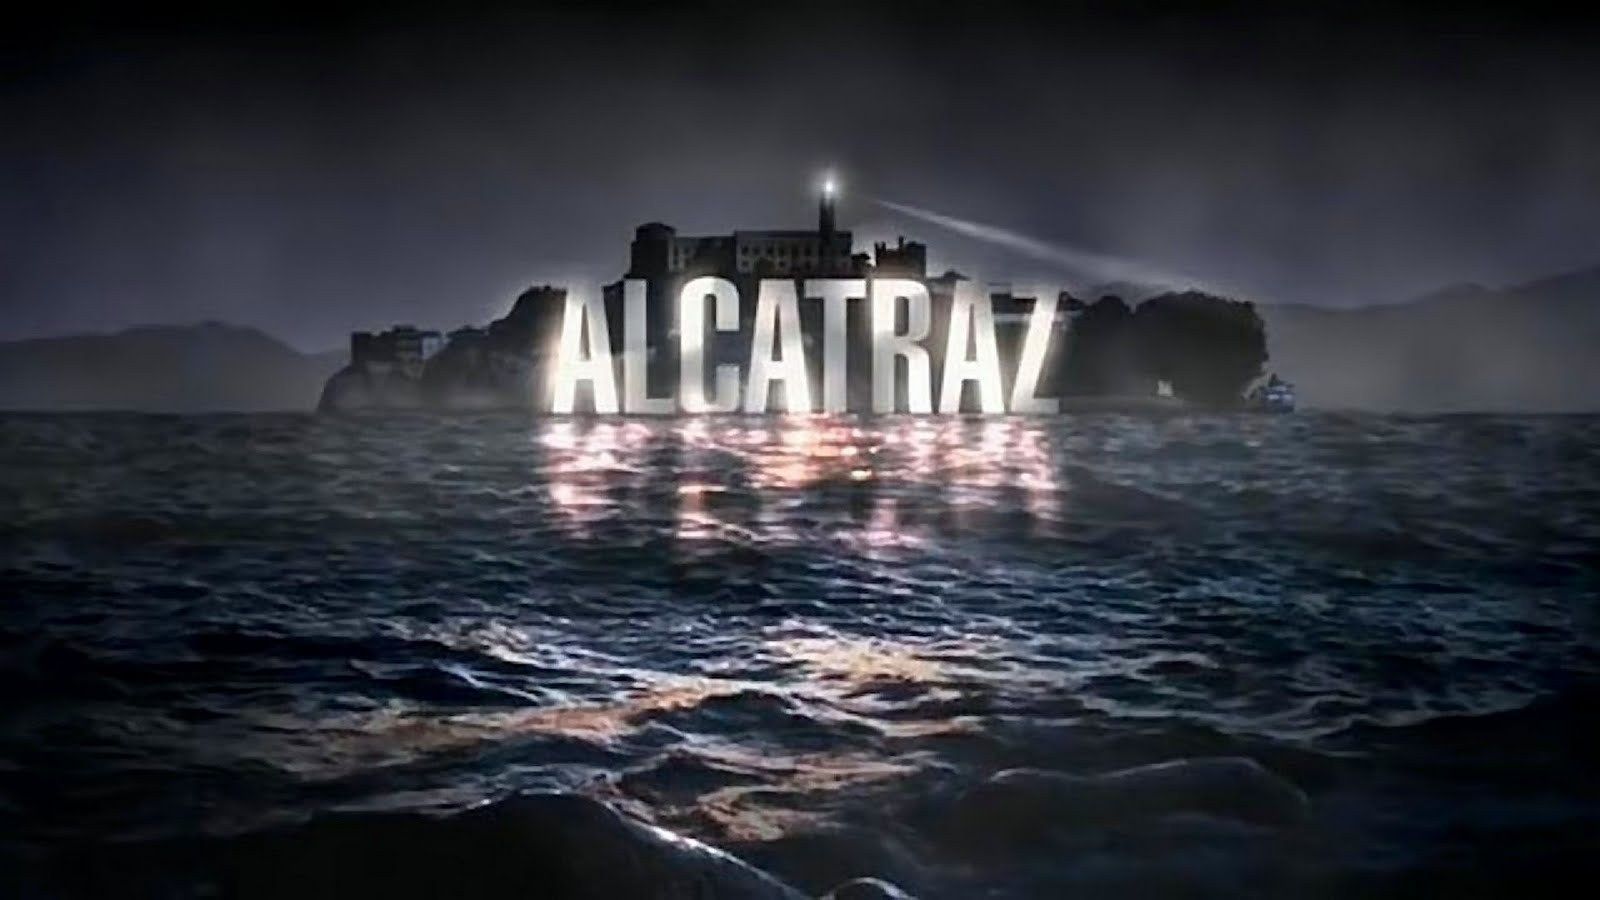 image of Alcatraz show logo, which is the island at night, with large block letters spelling Alcatraz